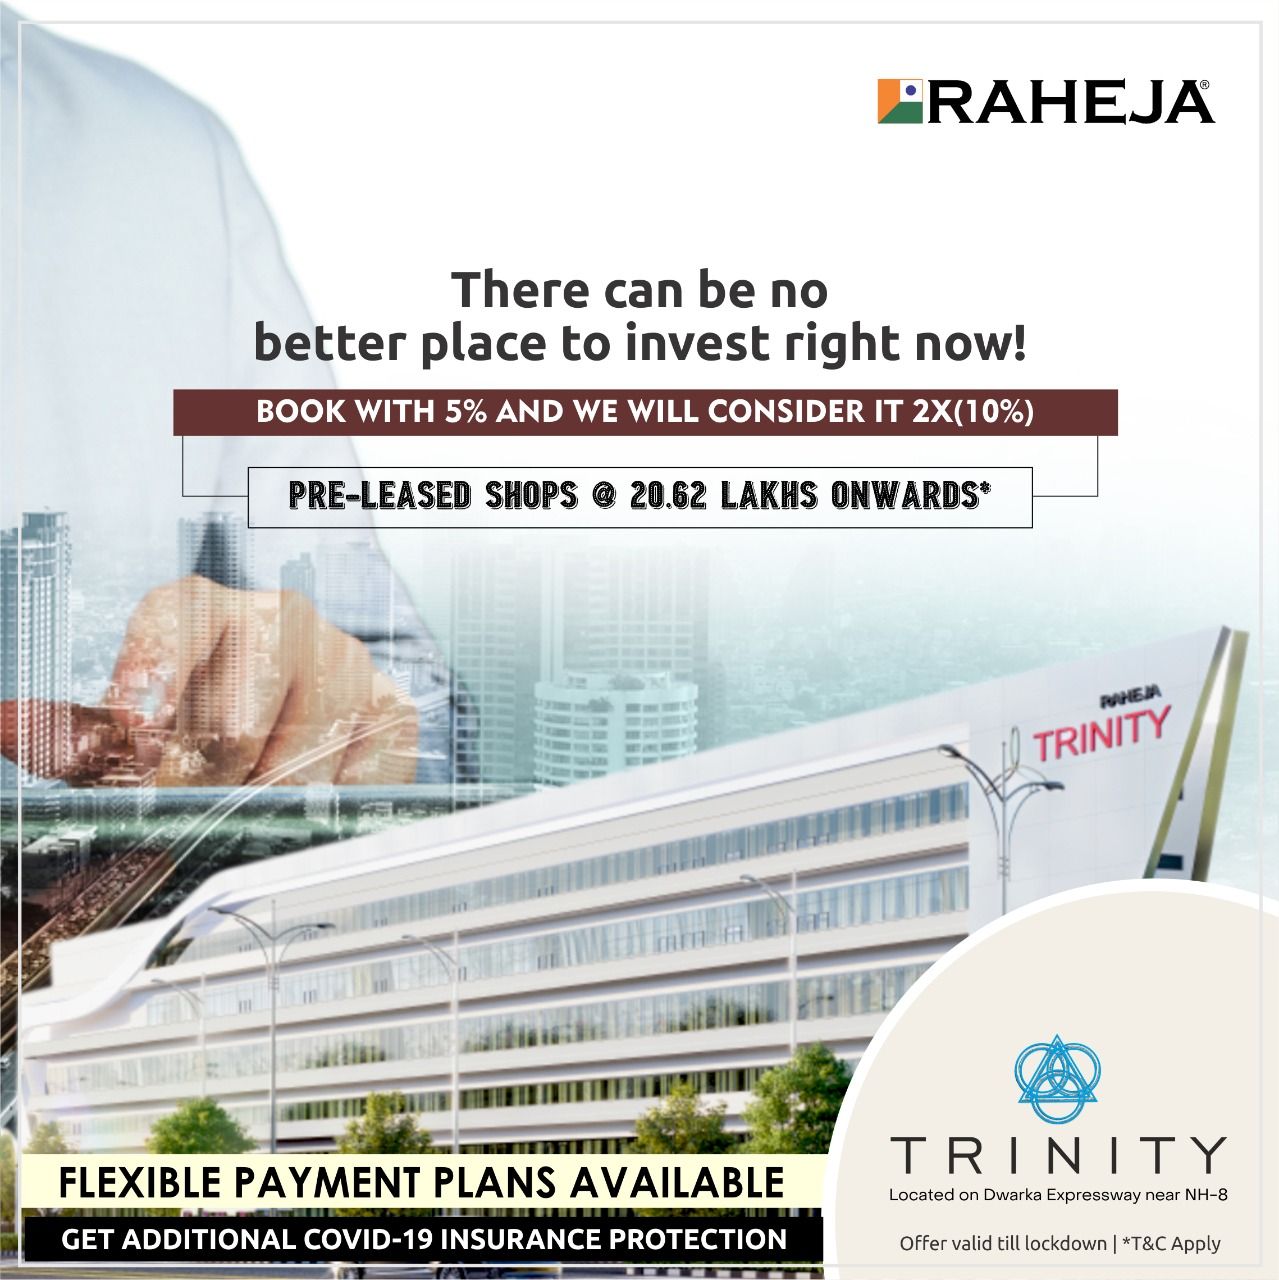 Book with 5% and we will considered it 2X(10%) at Raheja Trinity in Gurgaon